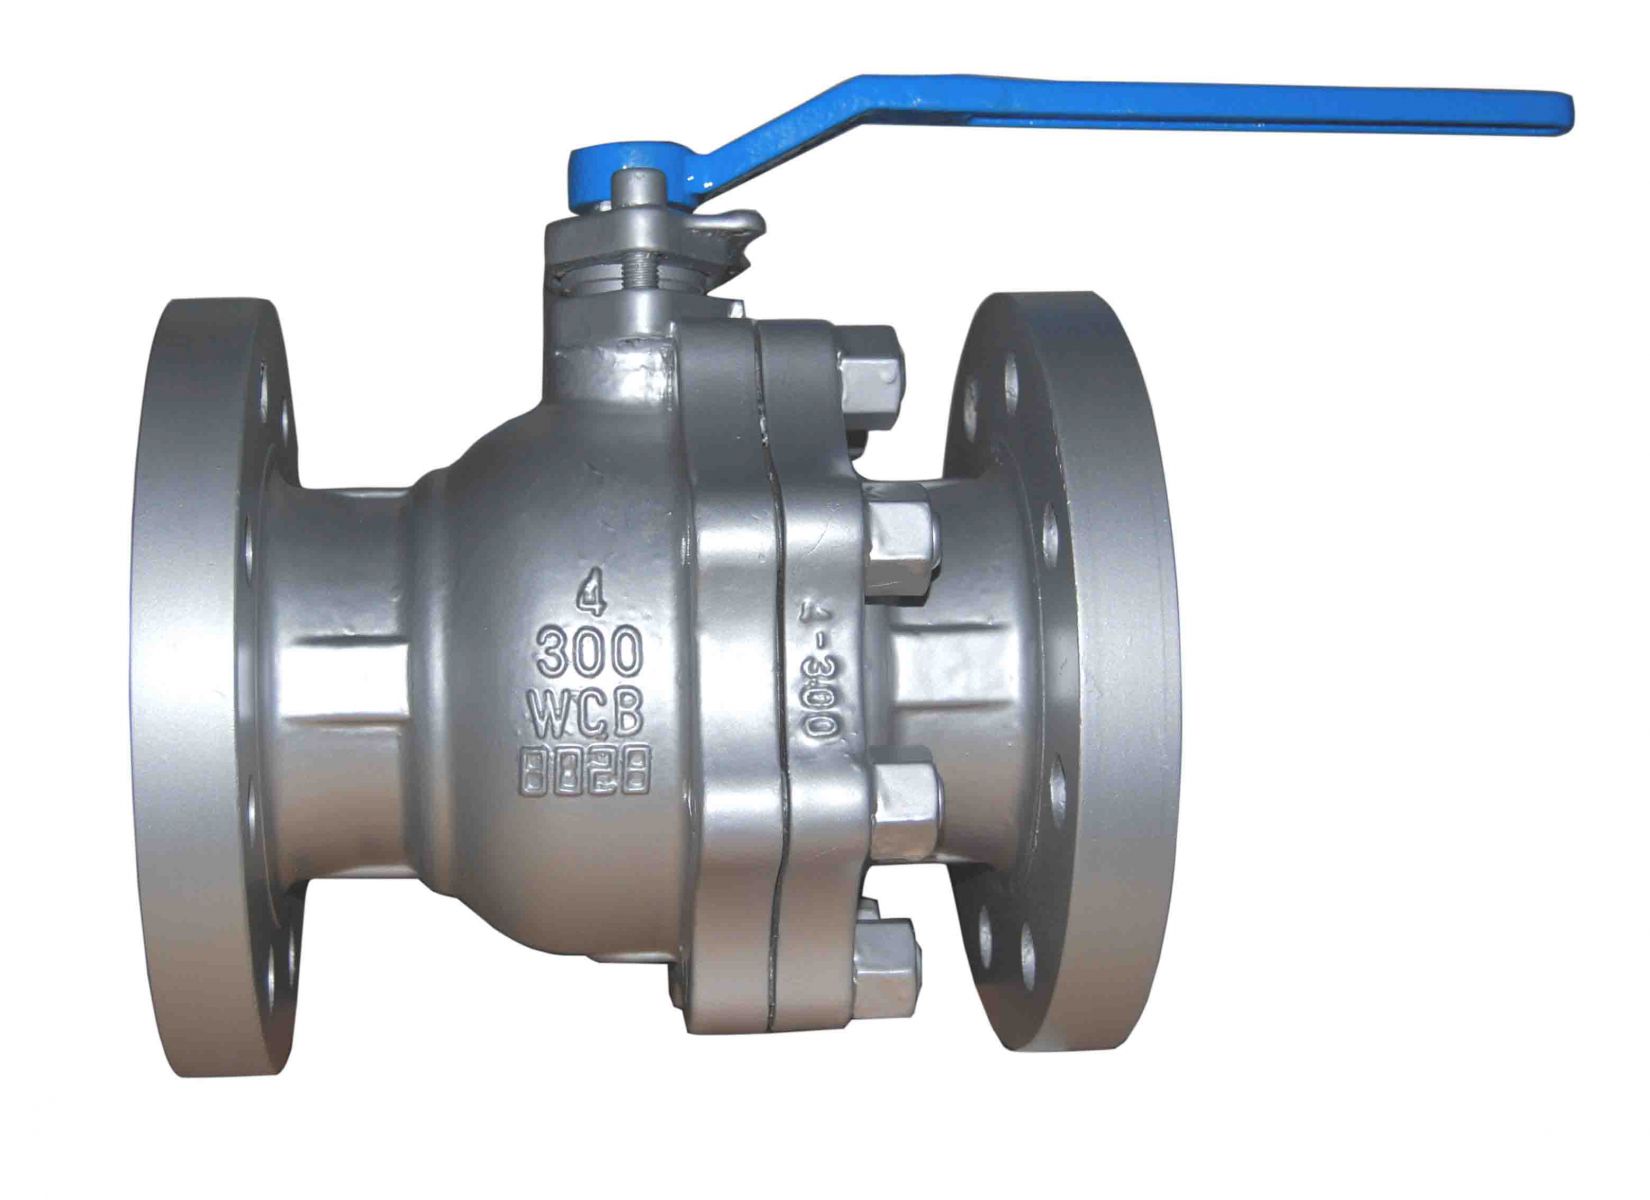 How to Choose Valves Used under Low Temperature Conditions?